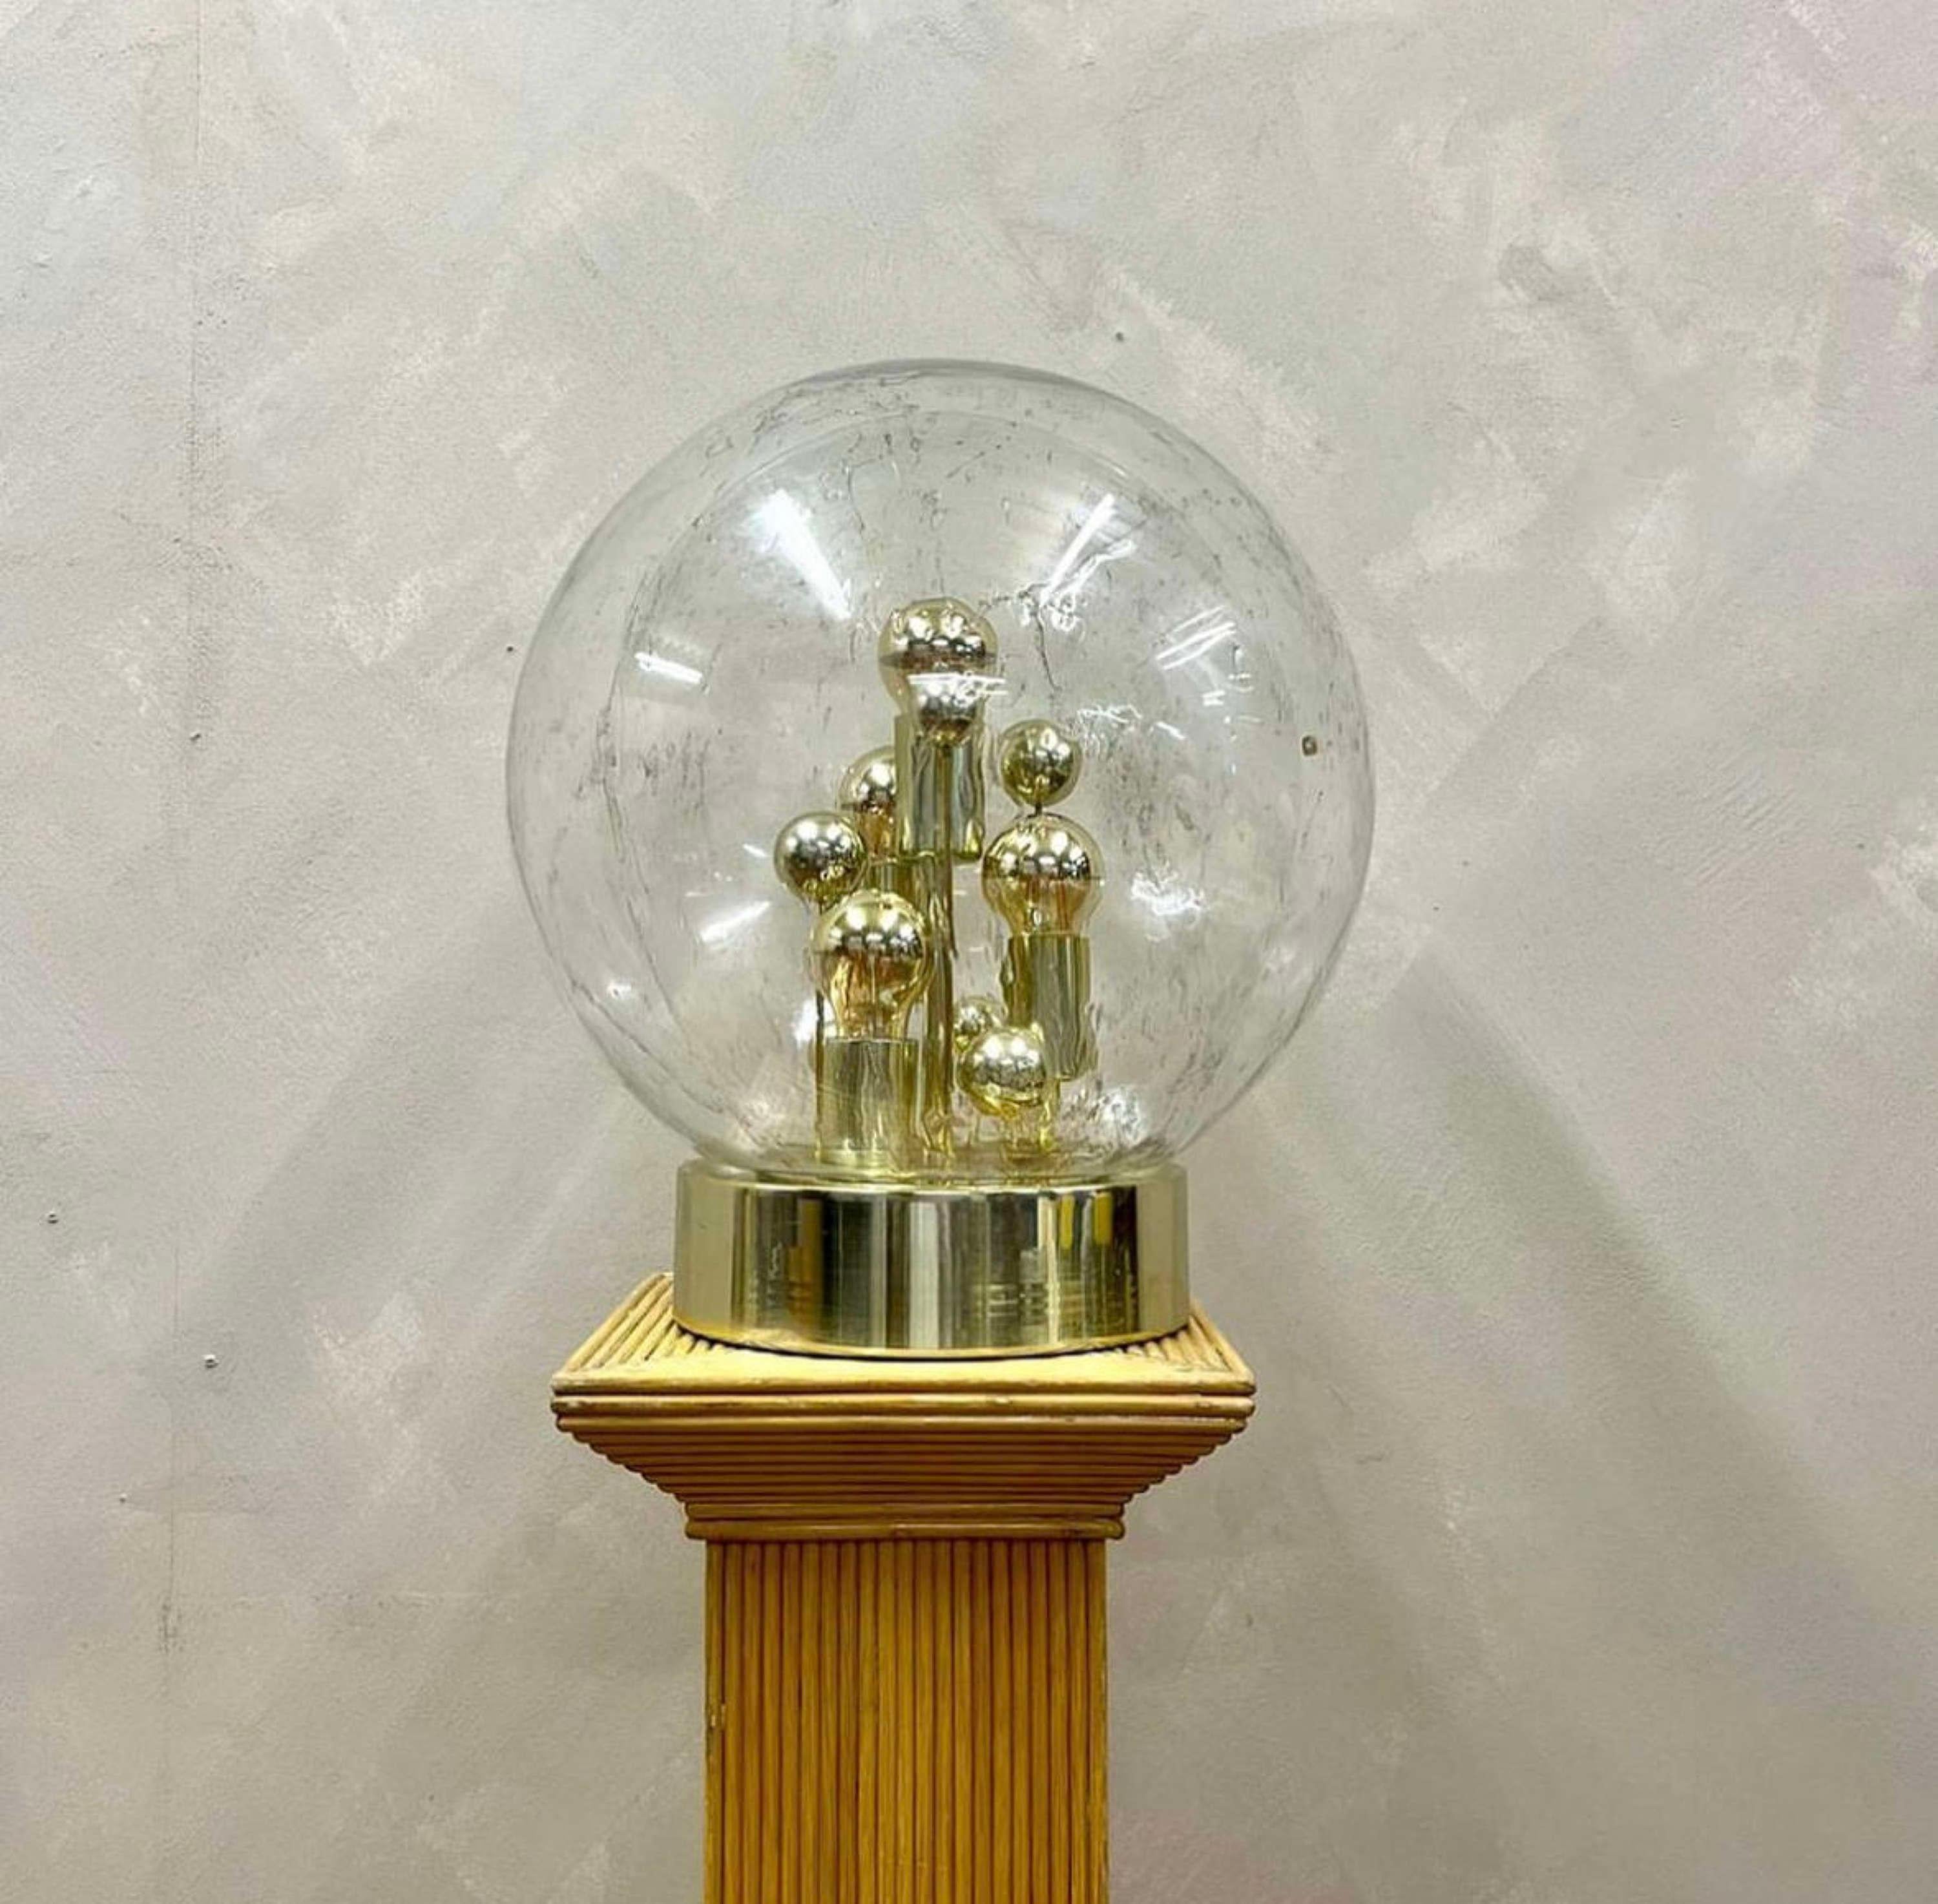 A rare opportunity to offer this 1960s, hand blown glass globe lamp, by German designer Doria Leuchten, founded in 1945.
Lit with gold dipped bulbs, this stunning centrepiece gives off a magnificent glow and is sure to be the talking point of any